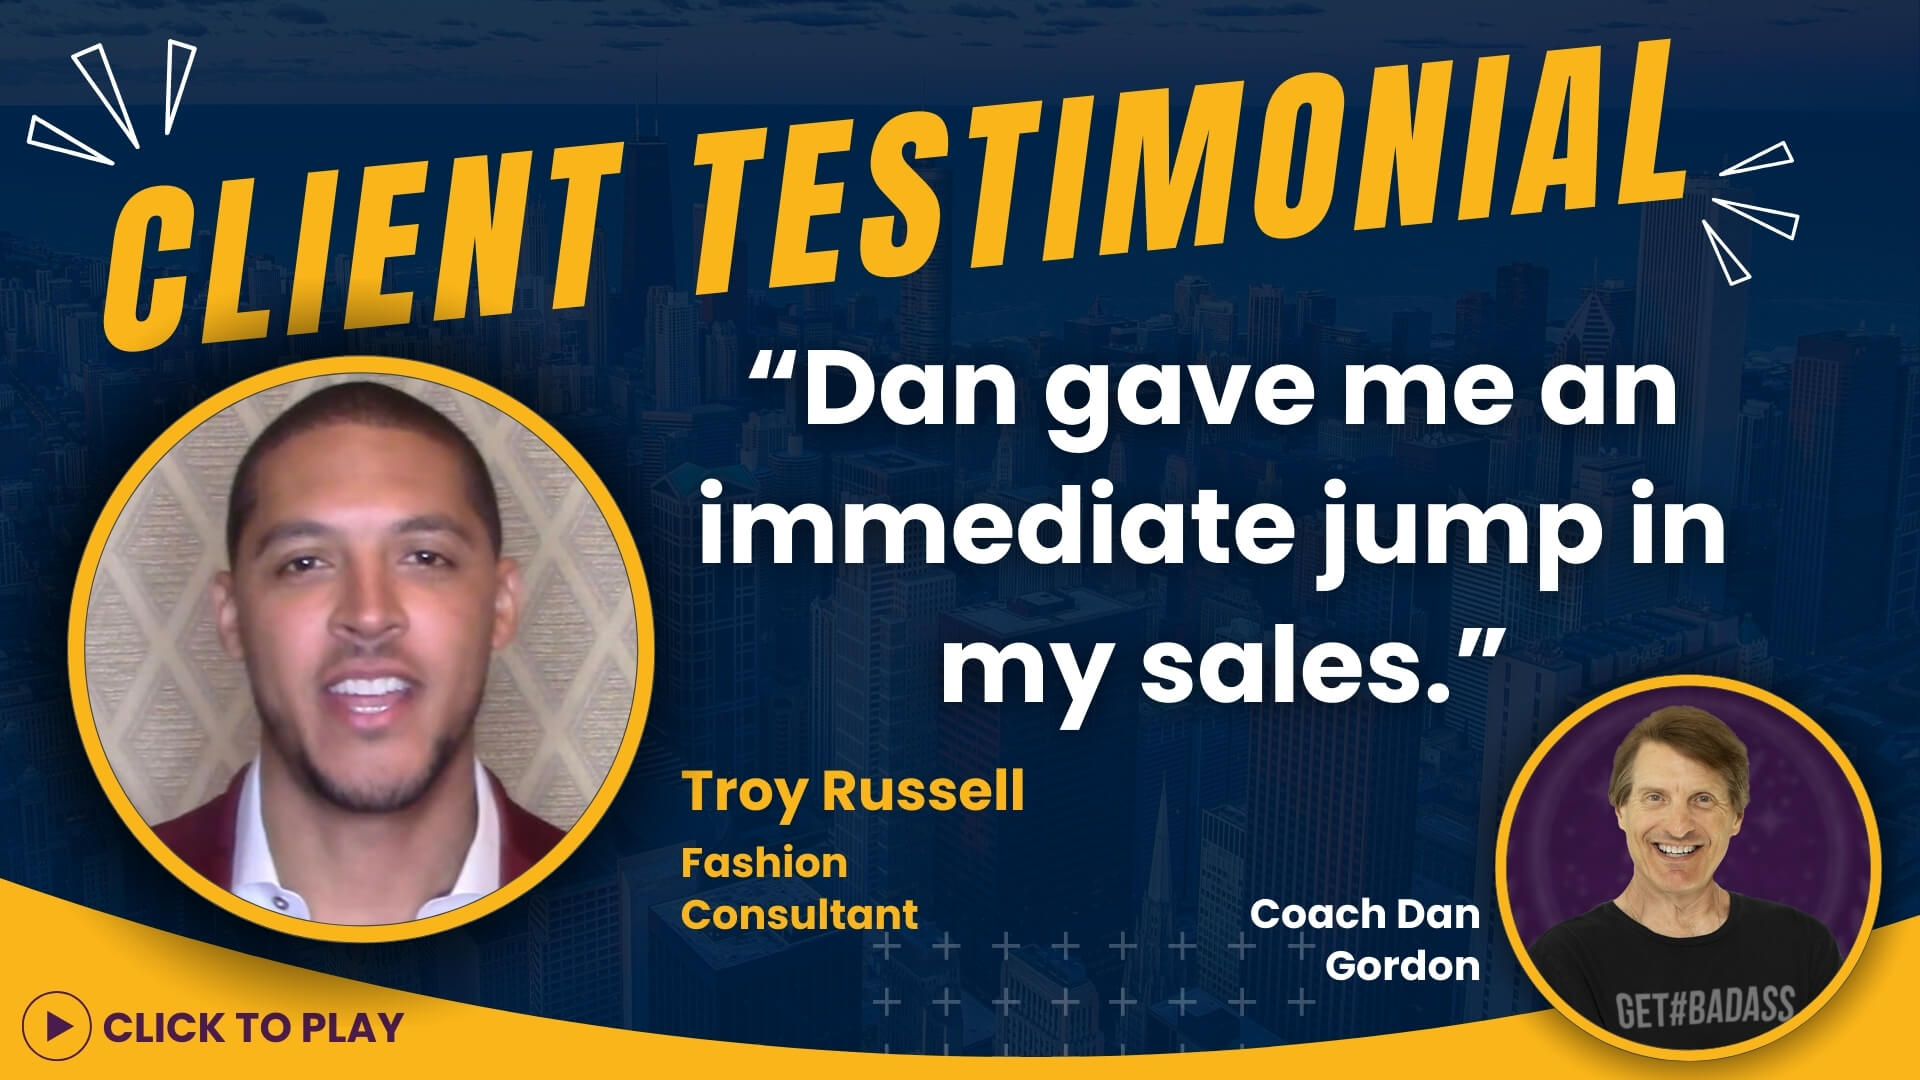 Fashion Consultant Troy Russell endorses Coach Dan Gordon, noting a significant boost in sales.